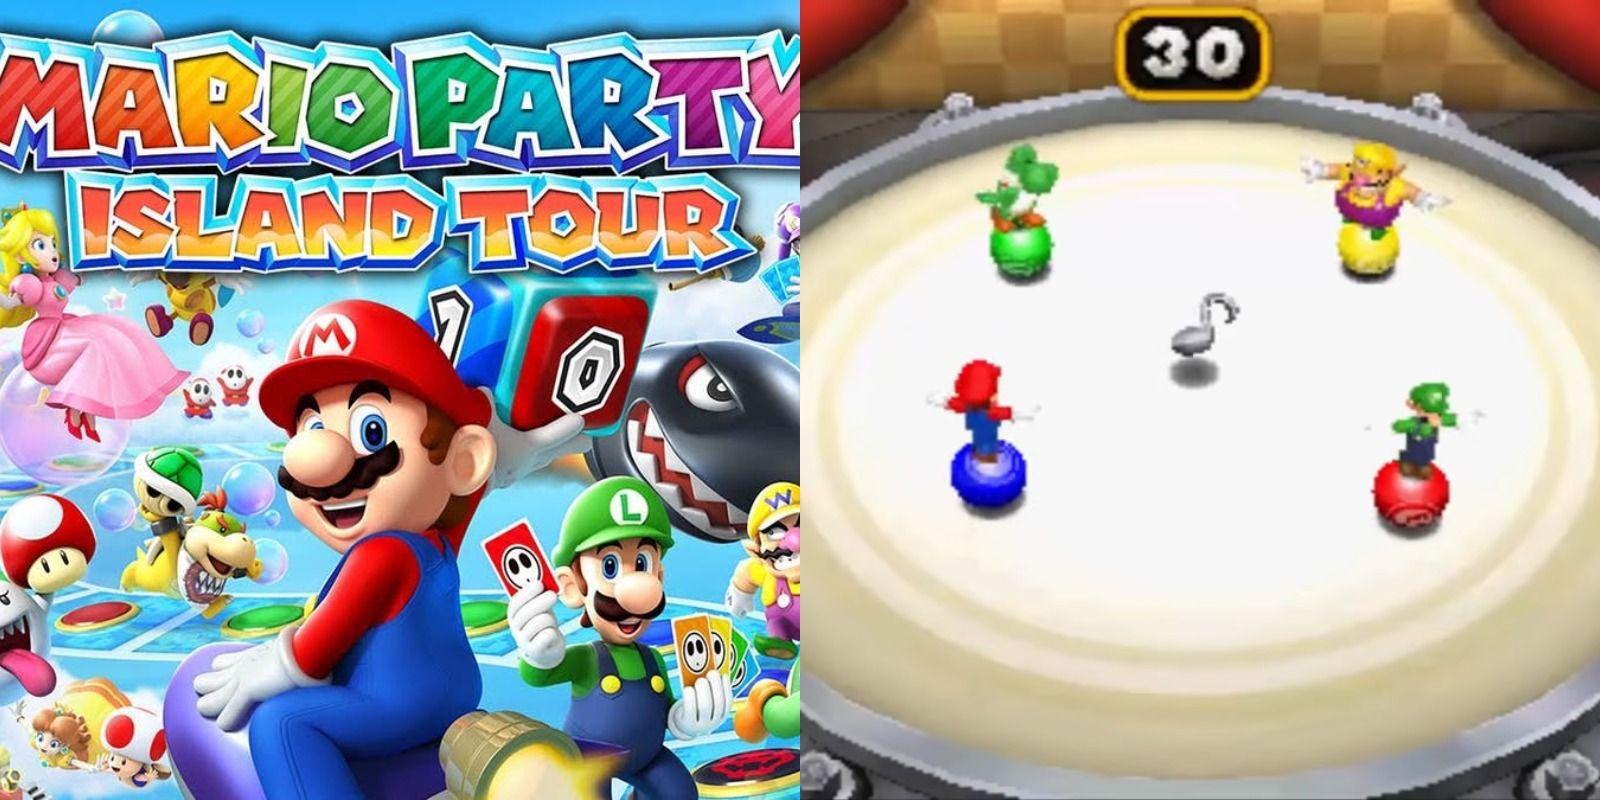 Mario Party Island Tour for the Nintendo 3DS